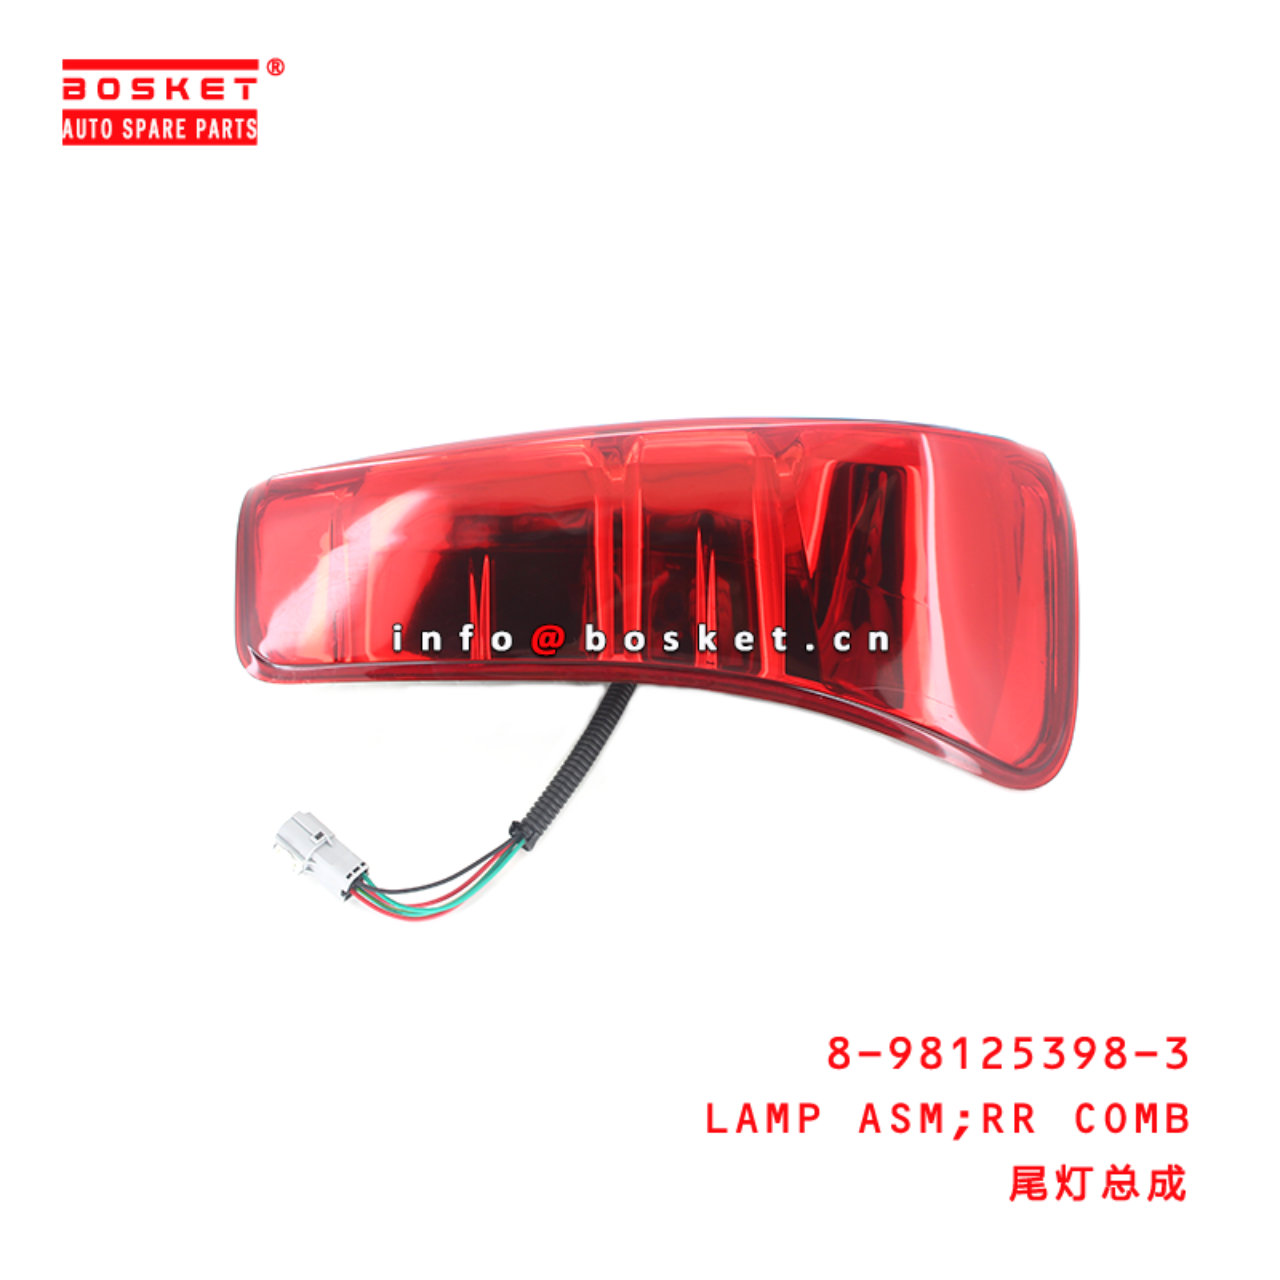 8-98125398-3 Rear Combination Lamp Assembly 8981253983 Suitable for ISUZU D-MAX 2012